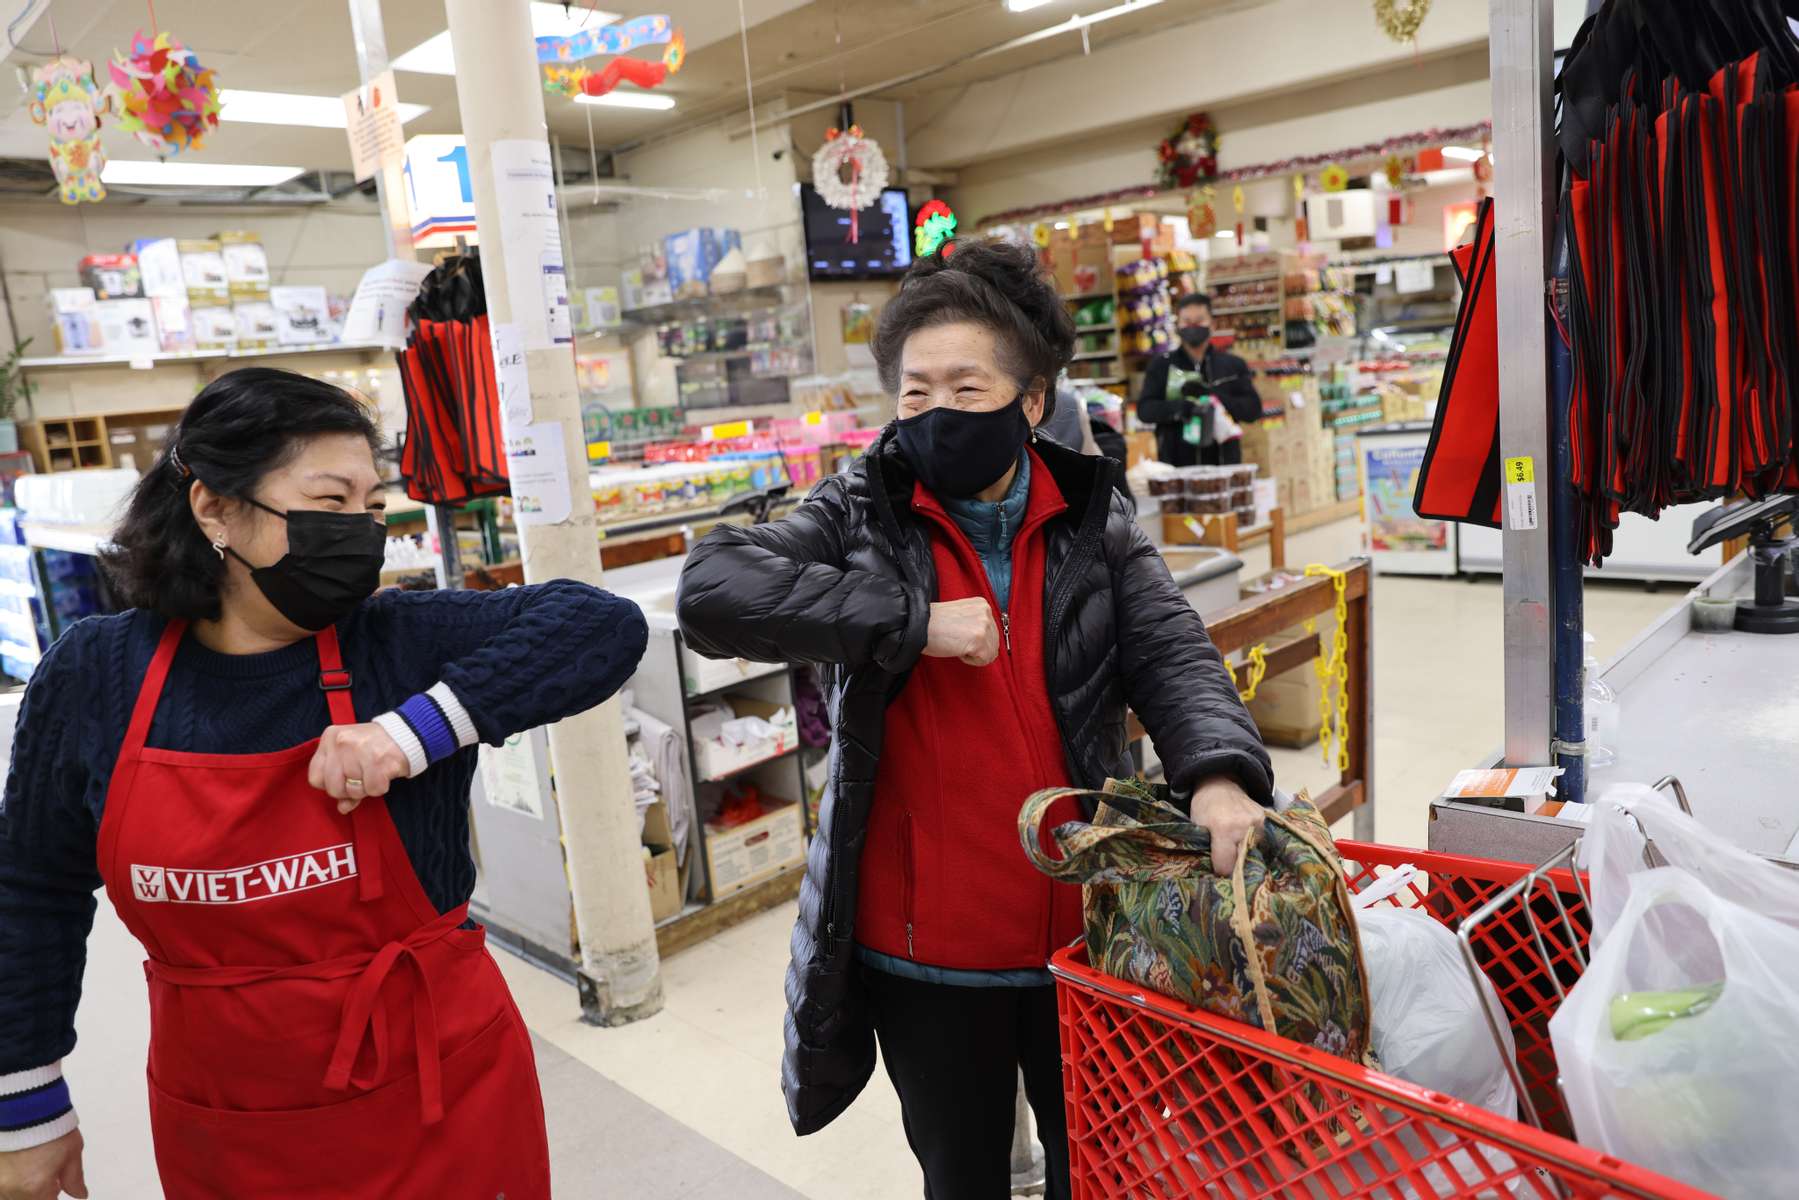 June Huynh (left) assistant manager, bumps elbows with Judy Lew as they greet each other at Viet-Wah, an Asian grocery store located in Seattle’s Little Saigon neighborhood, on February 24, 2021 in Seattle, Washington. Bumping elbows instead of shaking hands or hugging, became the proper way to greet someone to help curb the spread of Covid-19. (Photo by Karen Ducey)